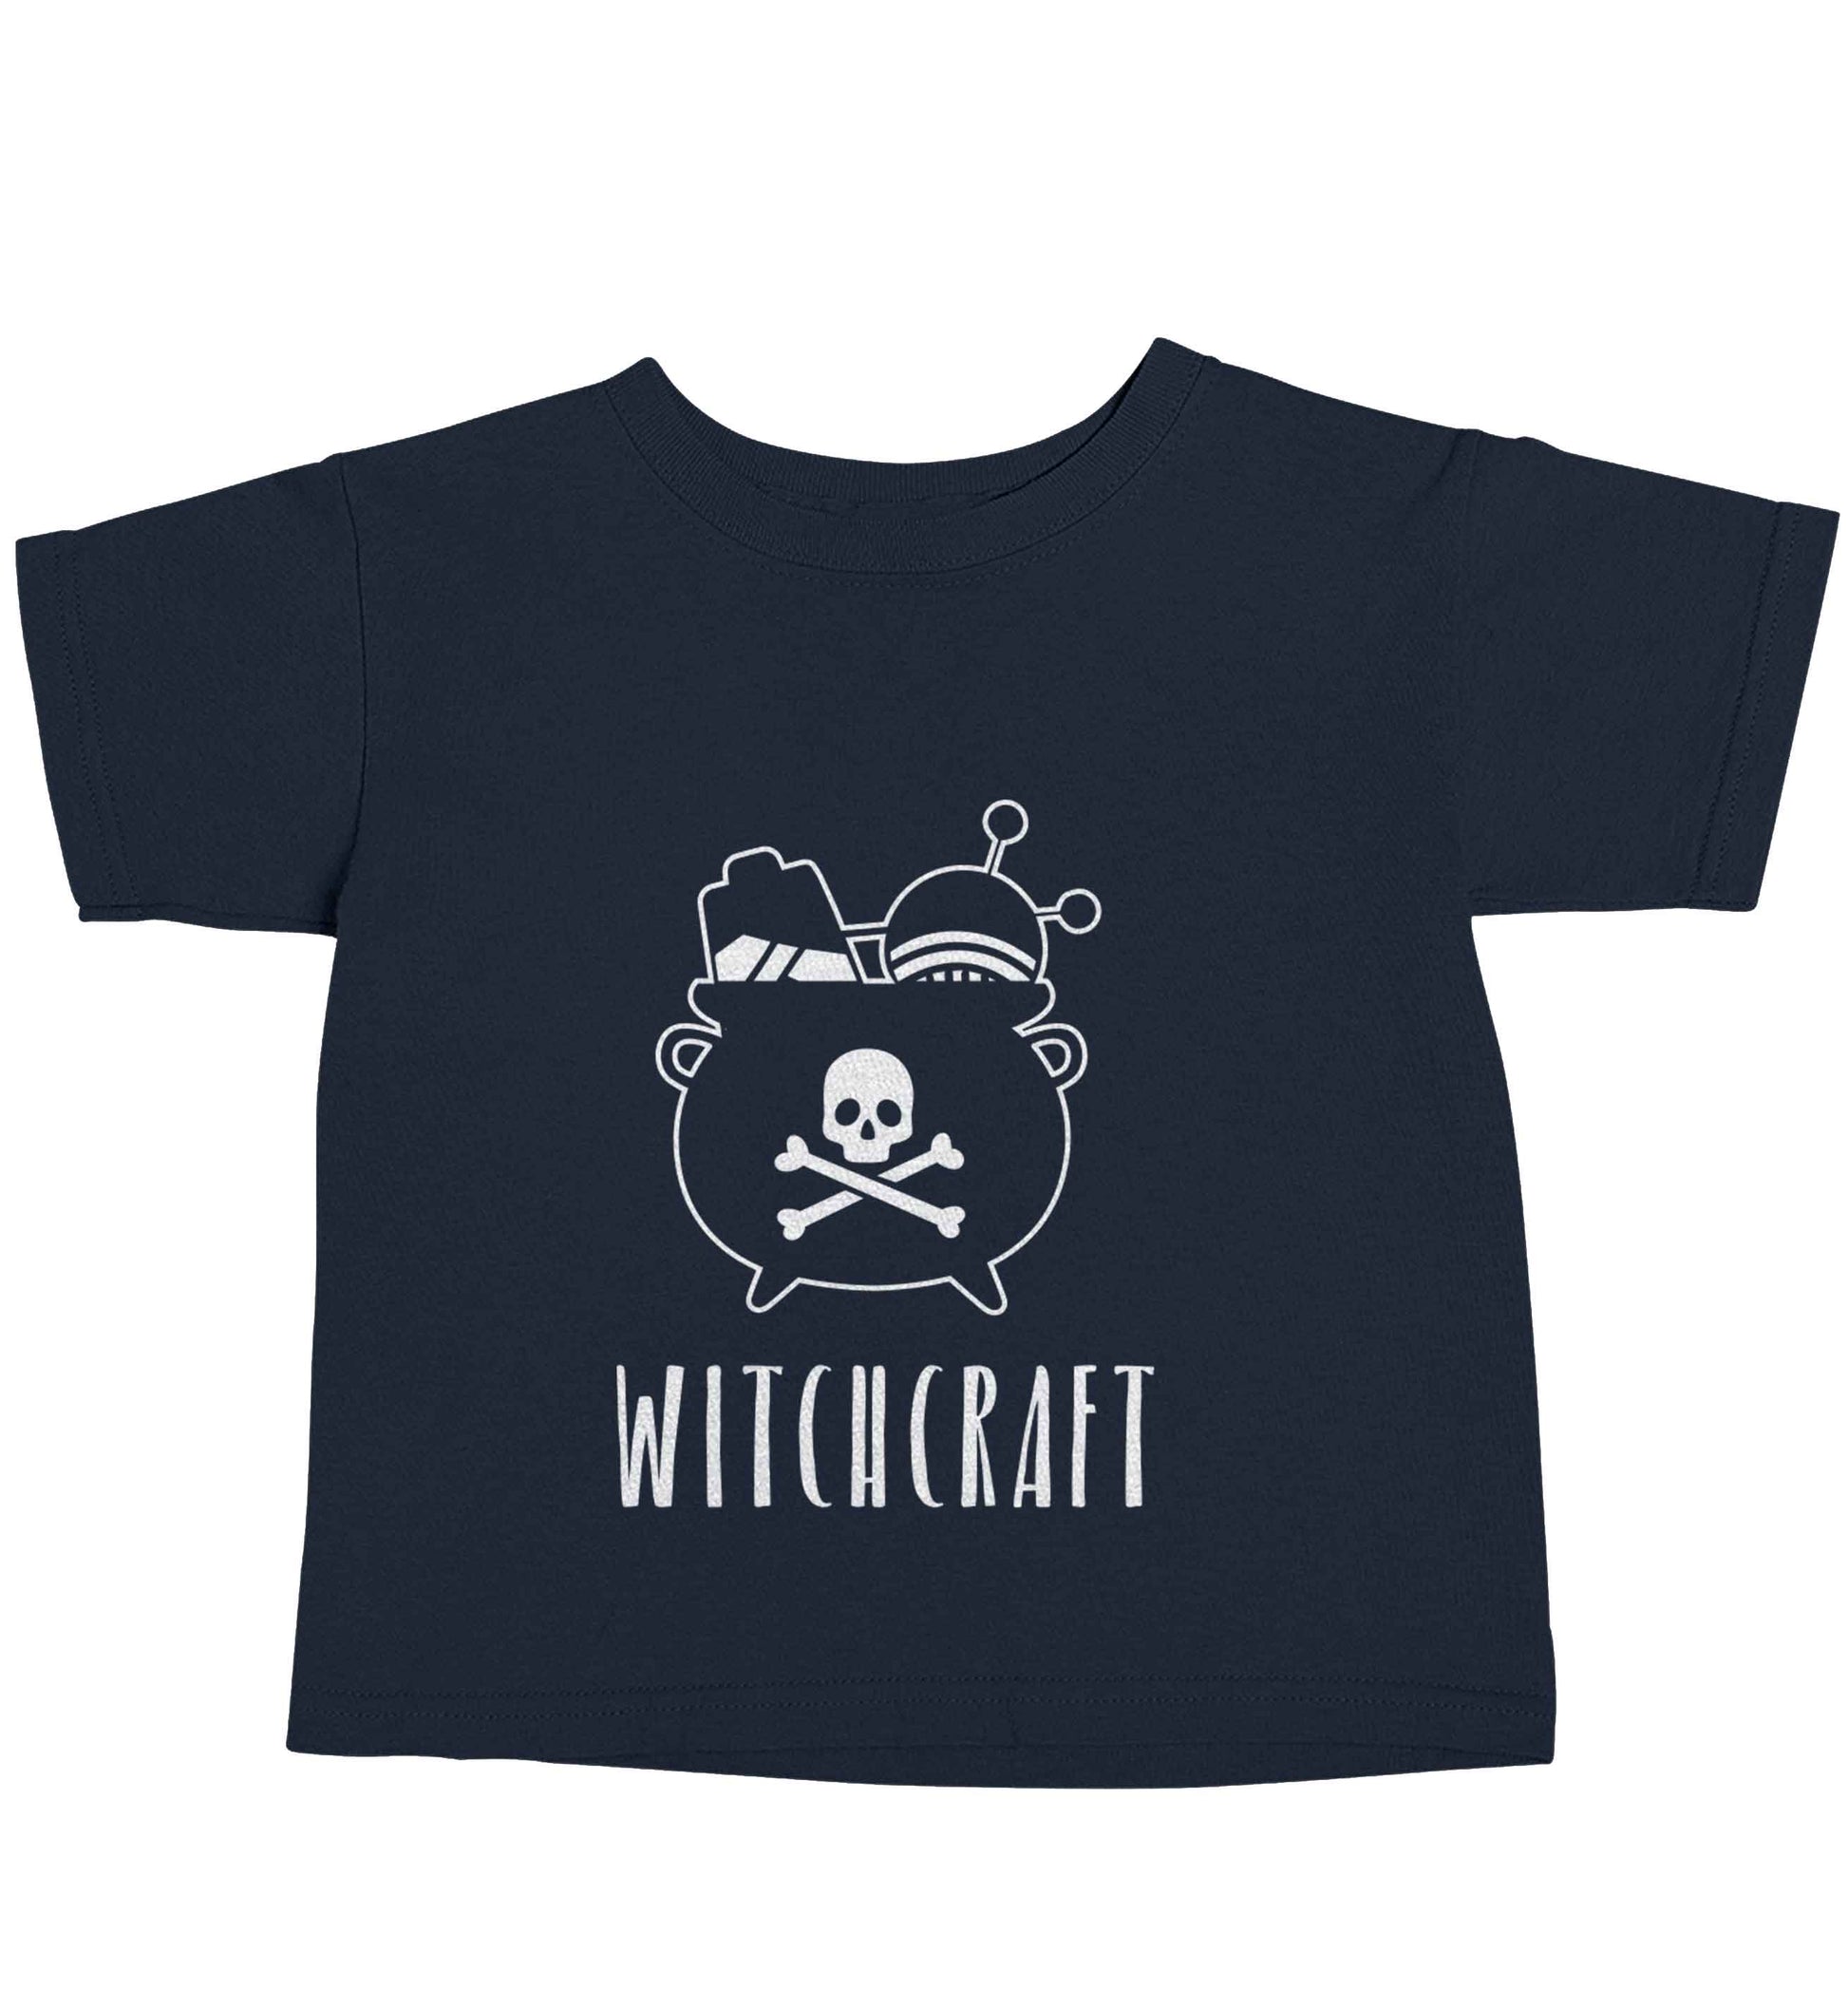 Witchcraft navy baby toddler Tshirt 2 Years